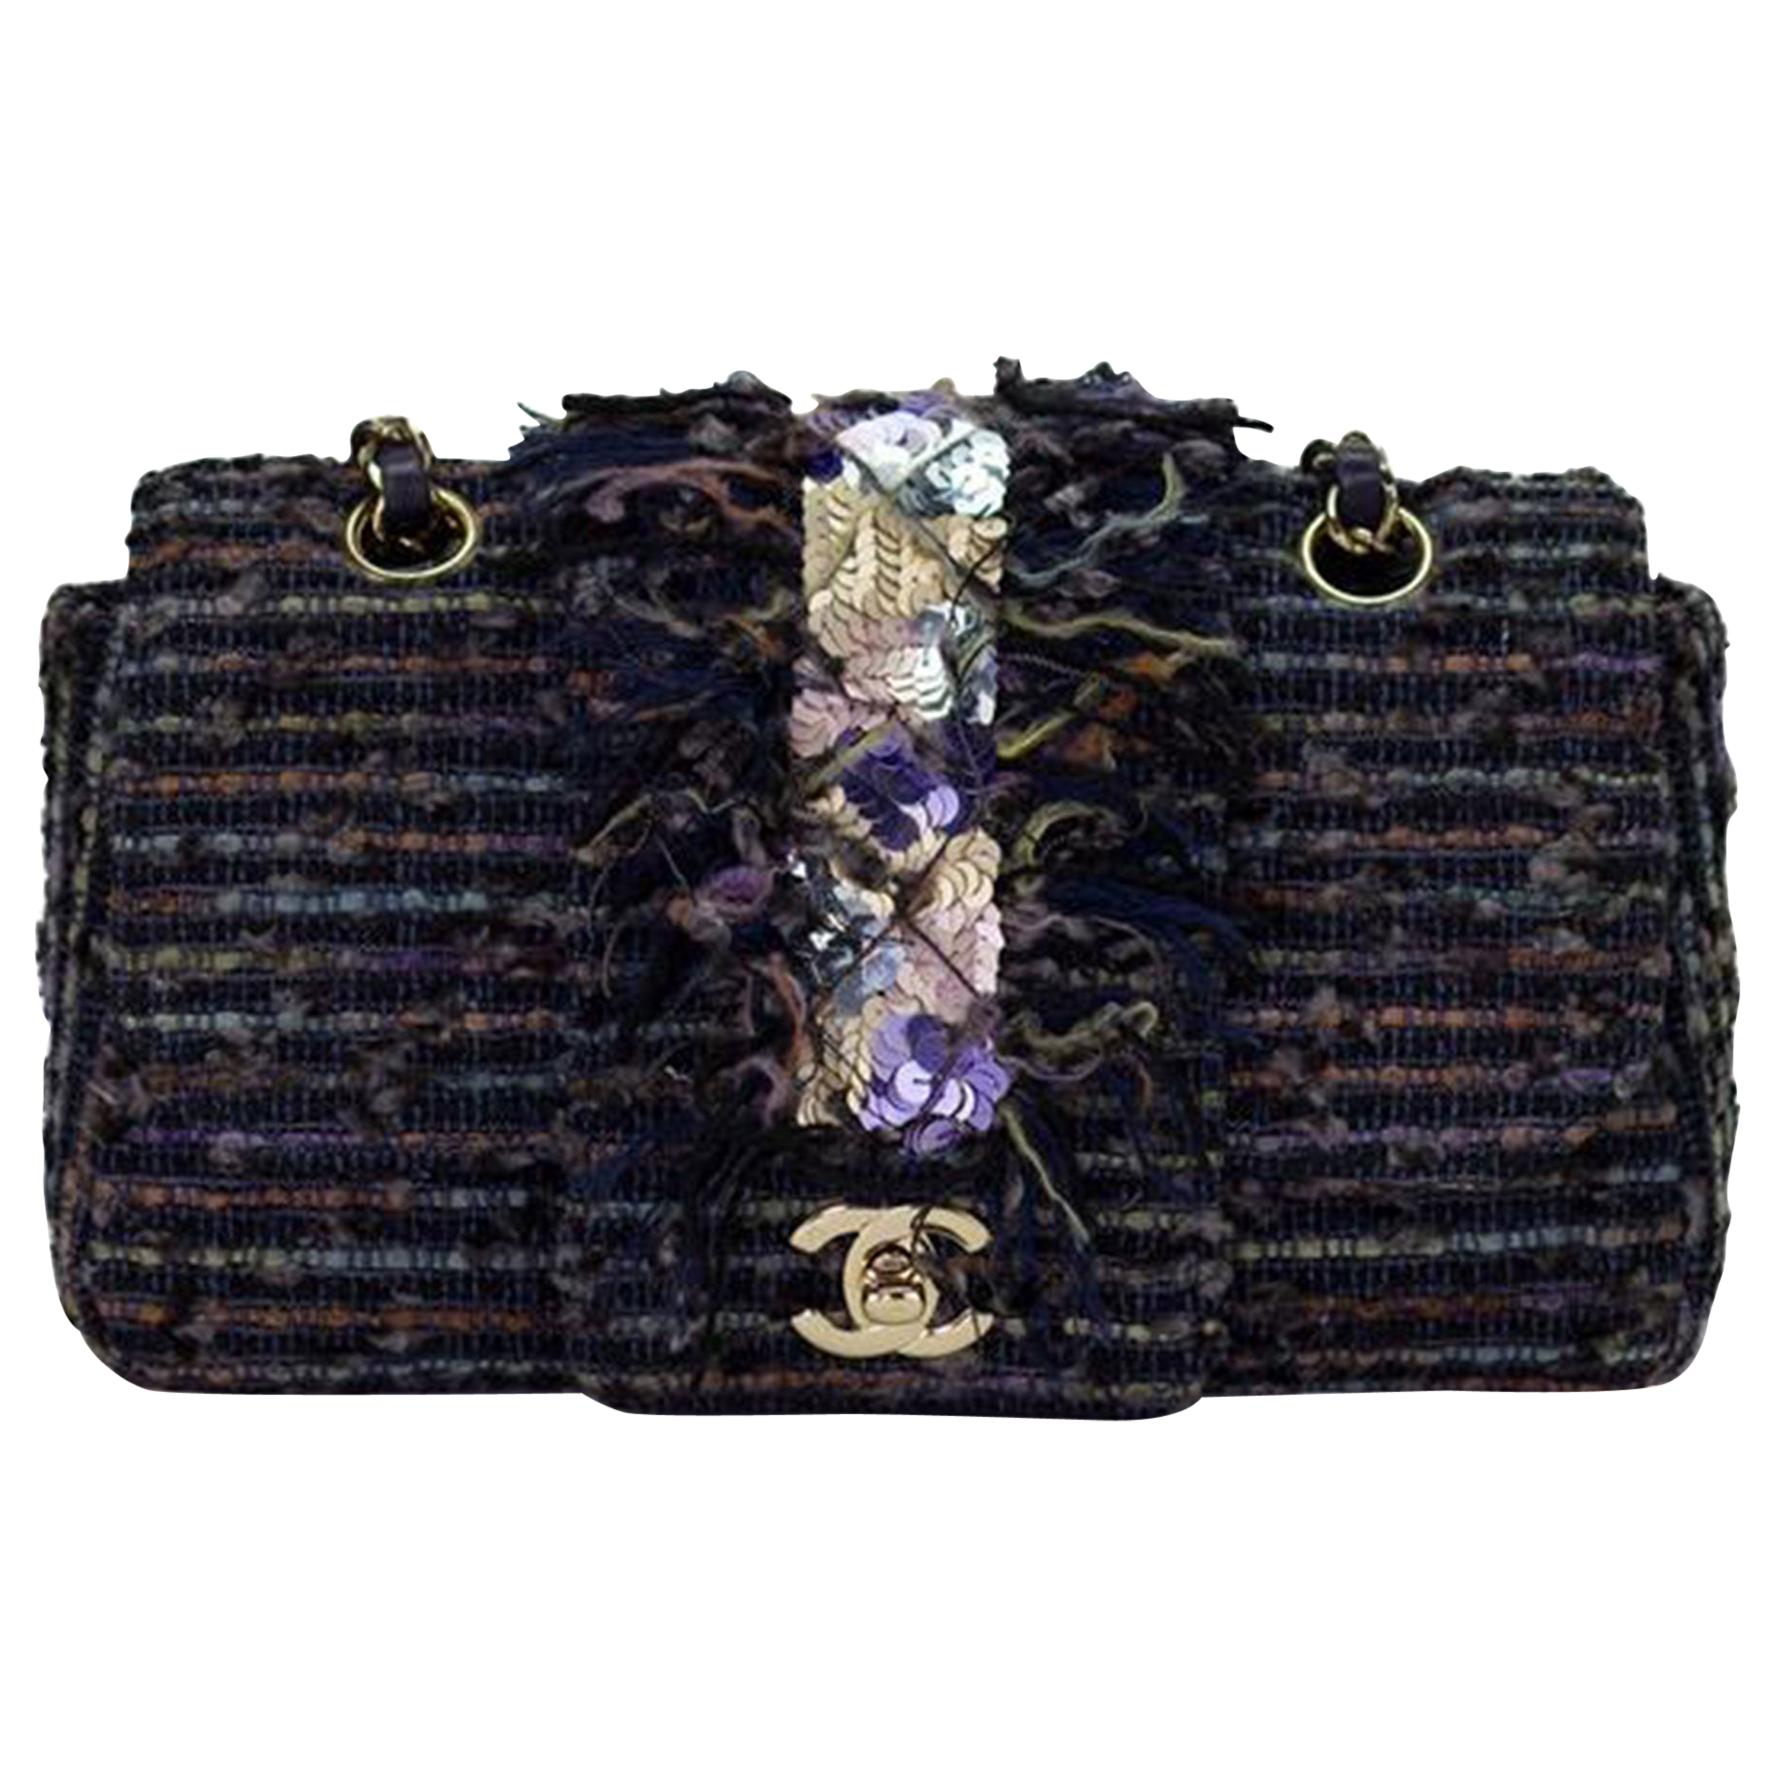 Chanel Vintage Rare Tweed Jeweled Sequin Mermaid Fringe Classic Flap Bag

2005 {VINTAGE 19 Years}
Small sized flap with mermaid colored sequins and classic interlocking clasp
Silver hardware
Interwoven chain
Small CC logo
Interior black lambskin